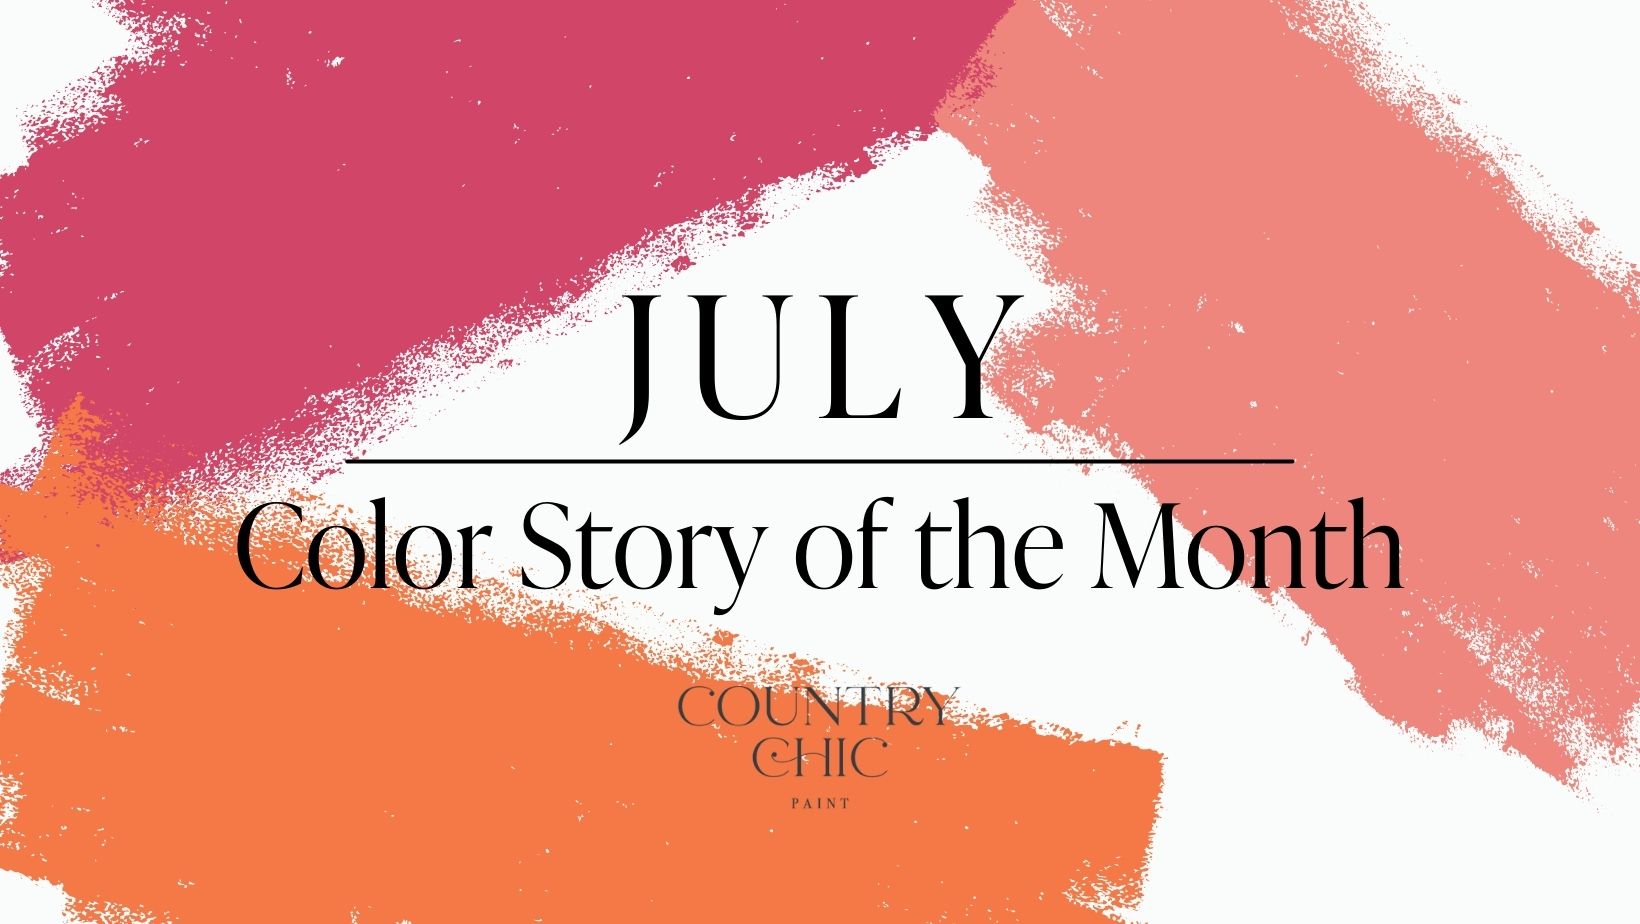 Color of the month July 2022 blog post header - persimmon, sunset glow, raspberry sorbet